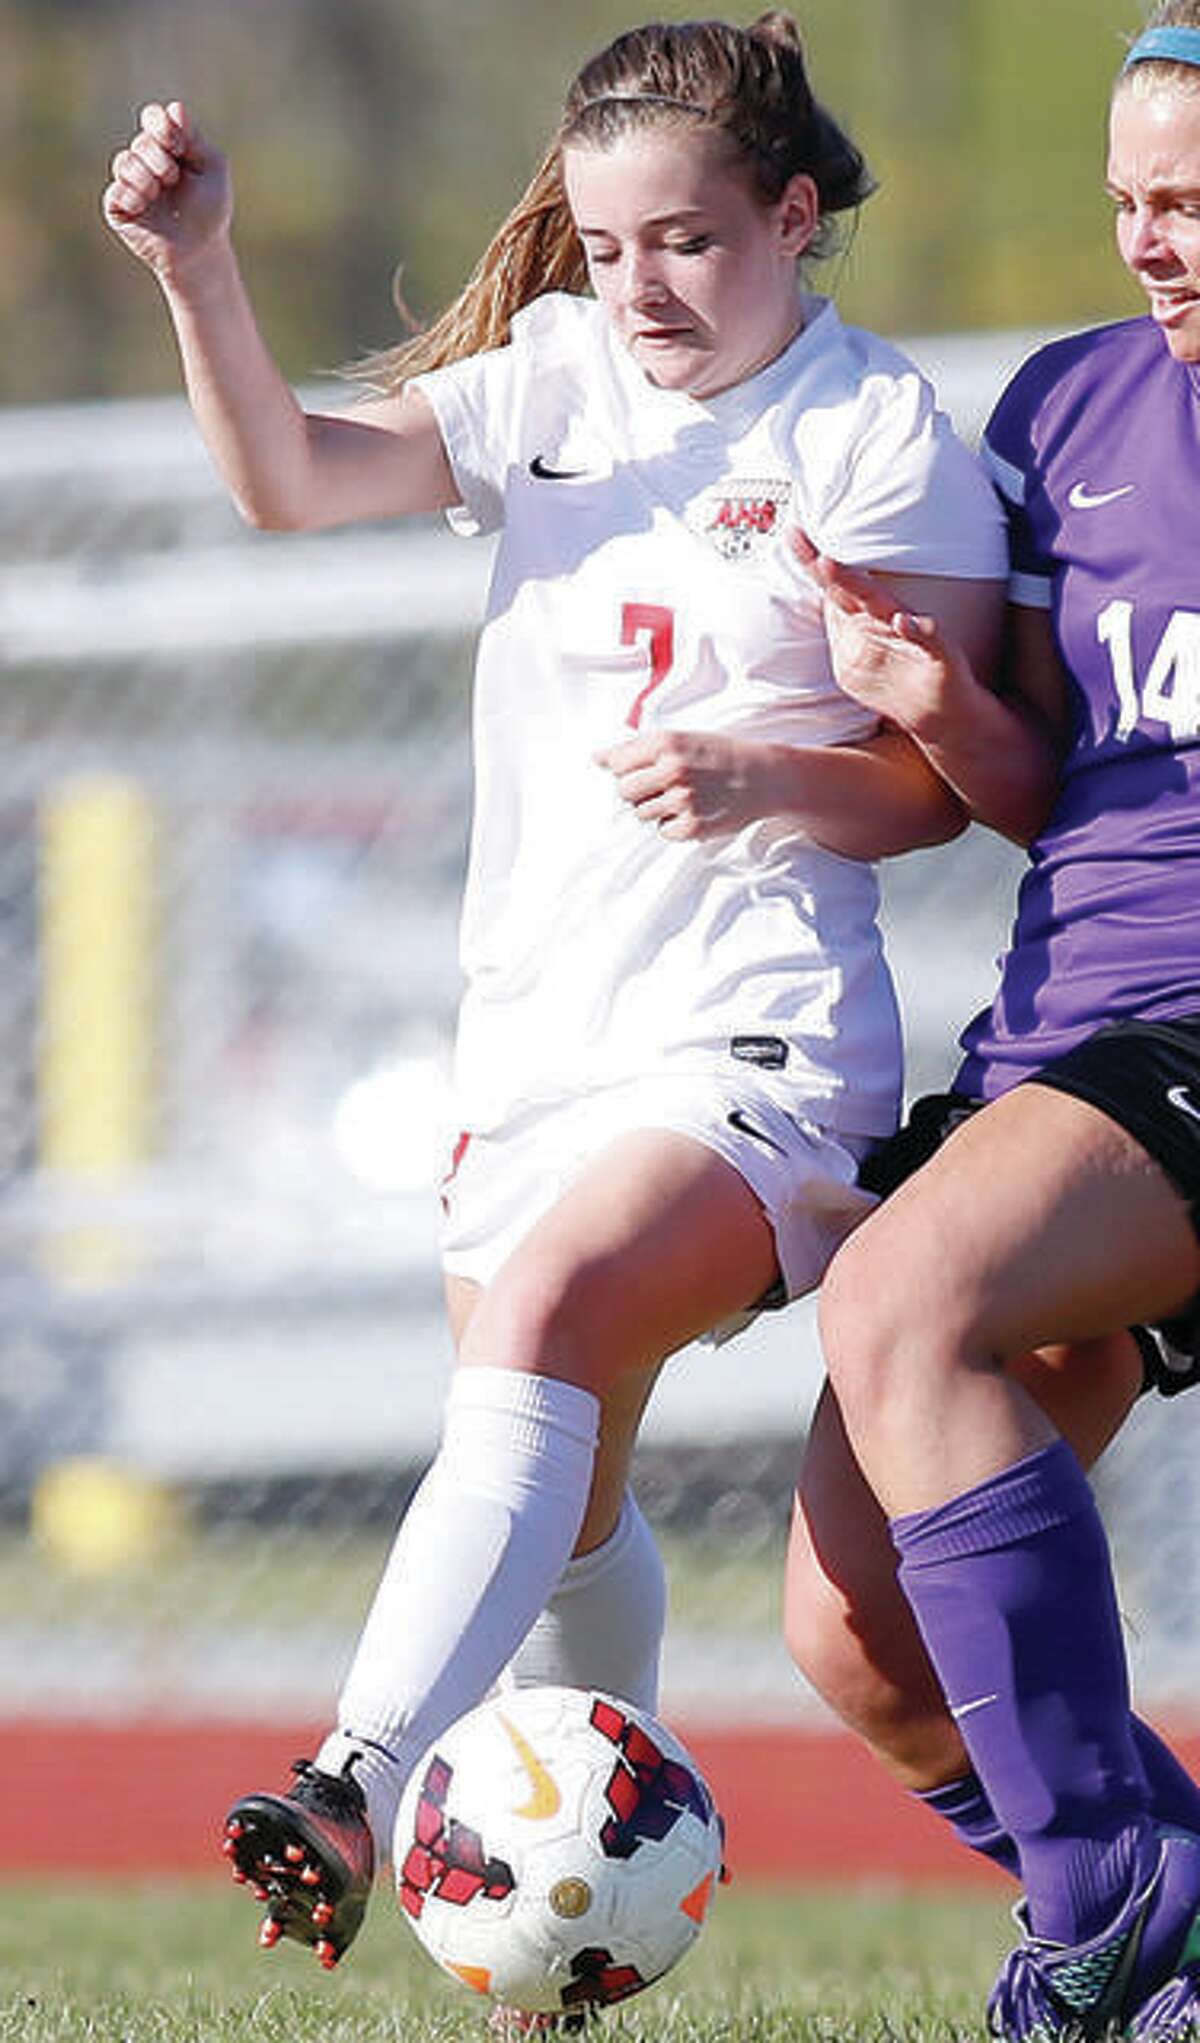 Alton’s Alaina Nasello (7) is a returning senior for the Redbirds, who are beginning their season this week in the Metro Cup tourney. She scored twice in a season-opening 4-0 win over Freeburg.